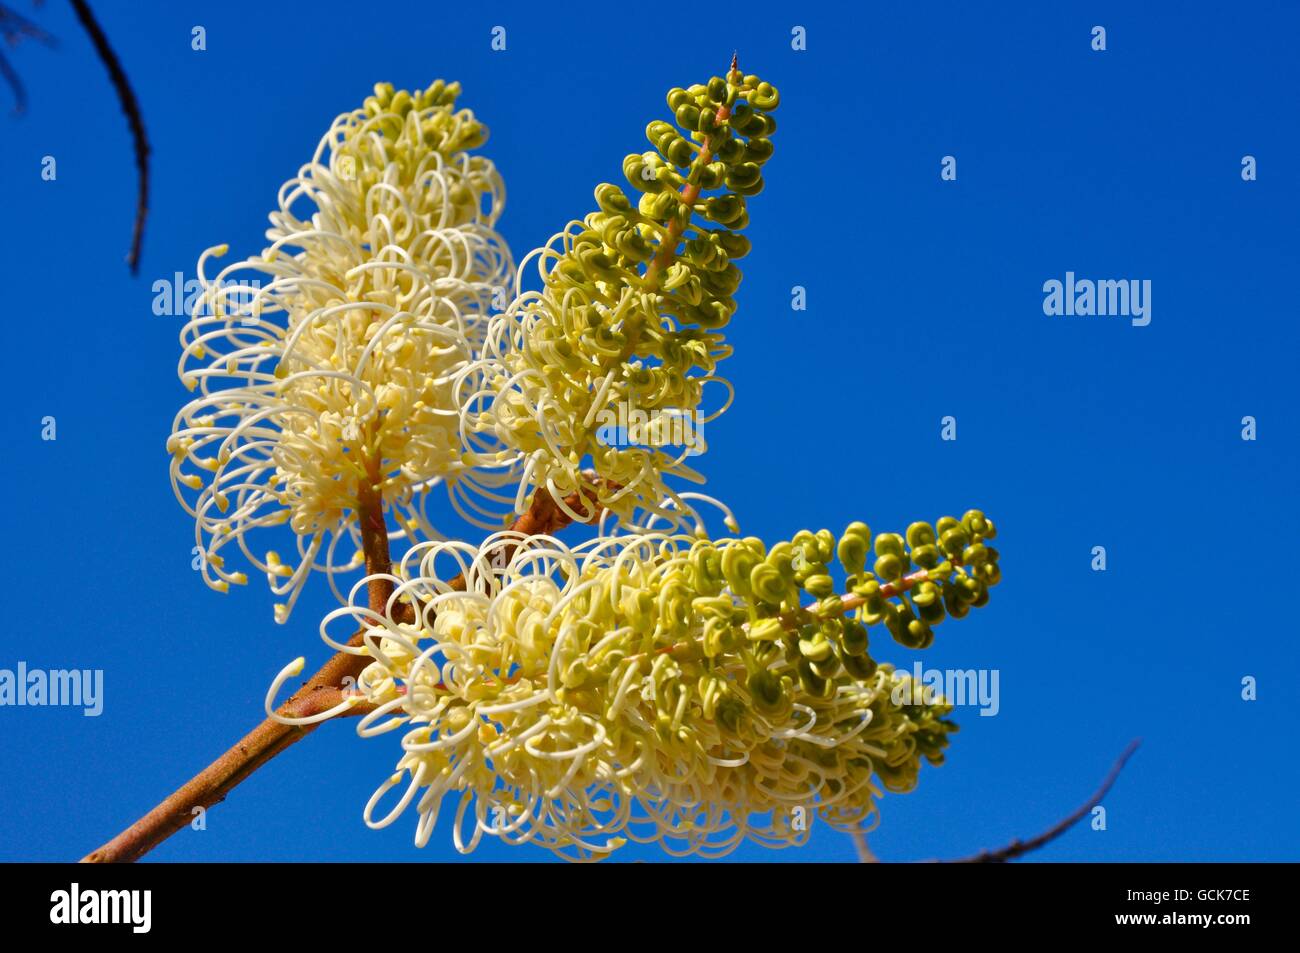 Creamy yellow and white wiry spider flower, Grevillia Moonlight, in outdoor nature setting with blue sky in Western Australia. Stock Photo